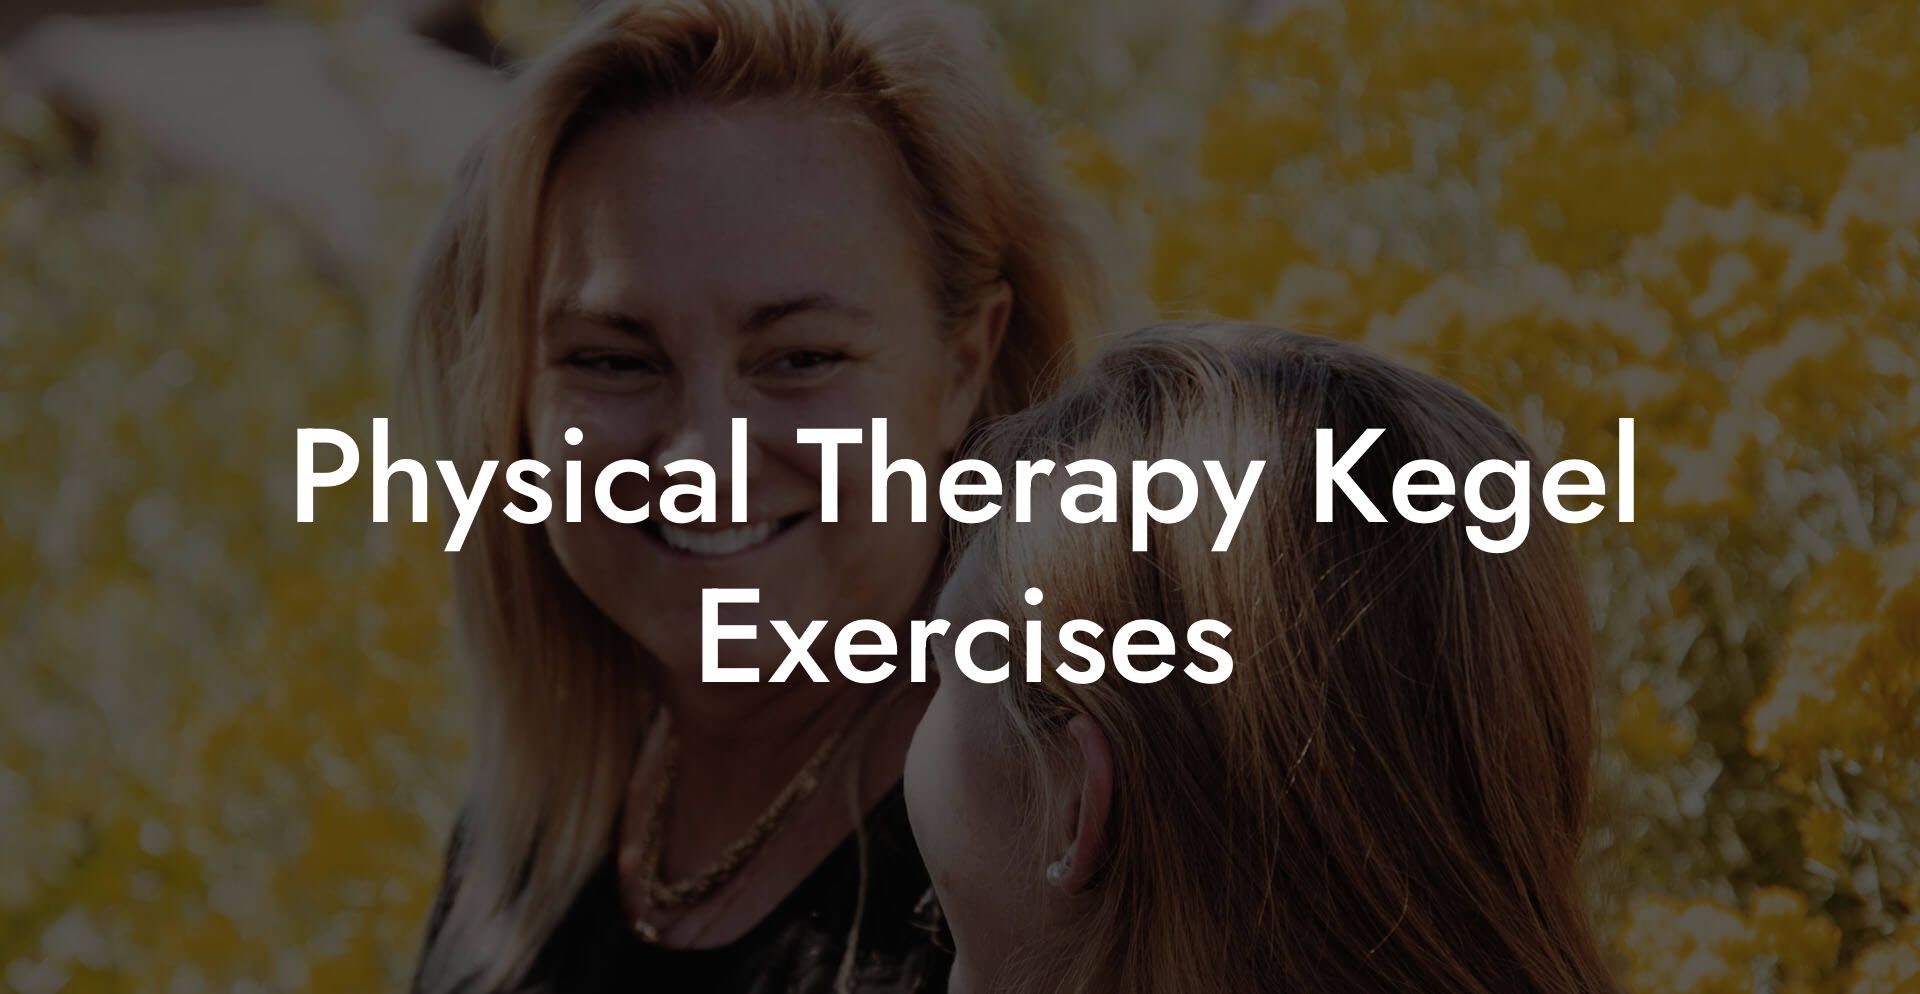 Physical Therapy Kegel Exercises